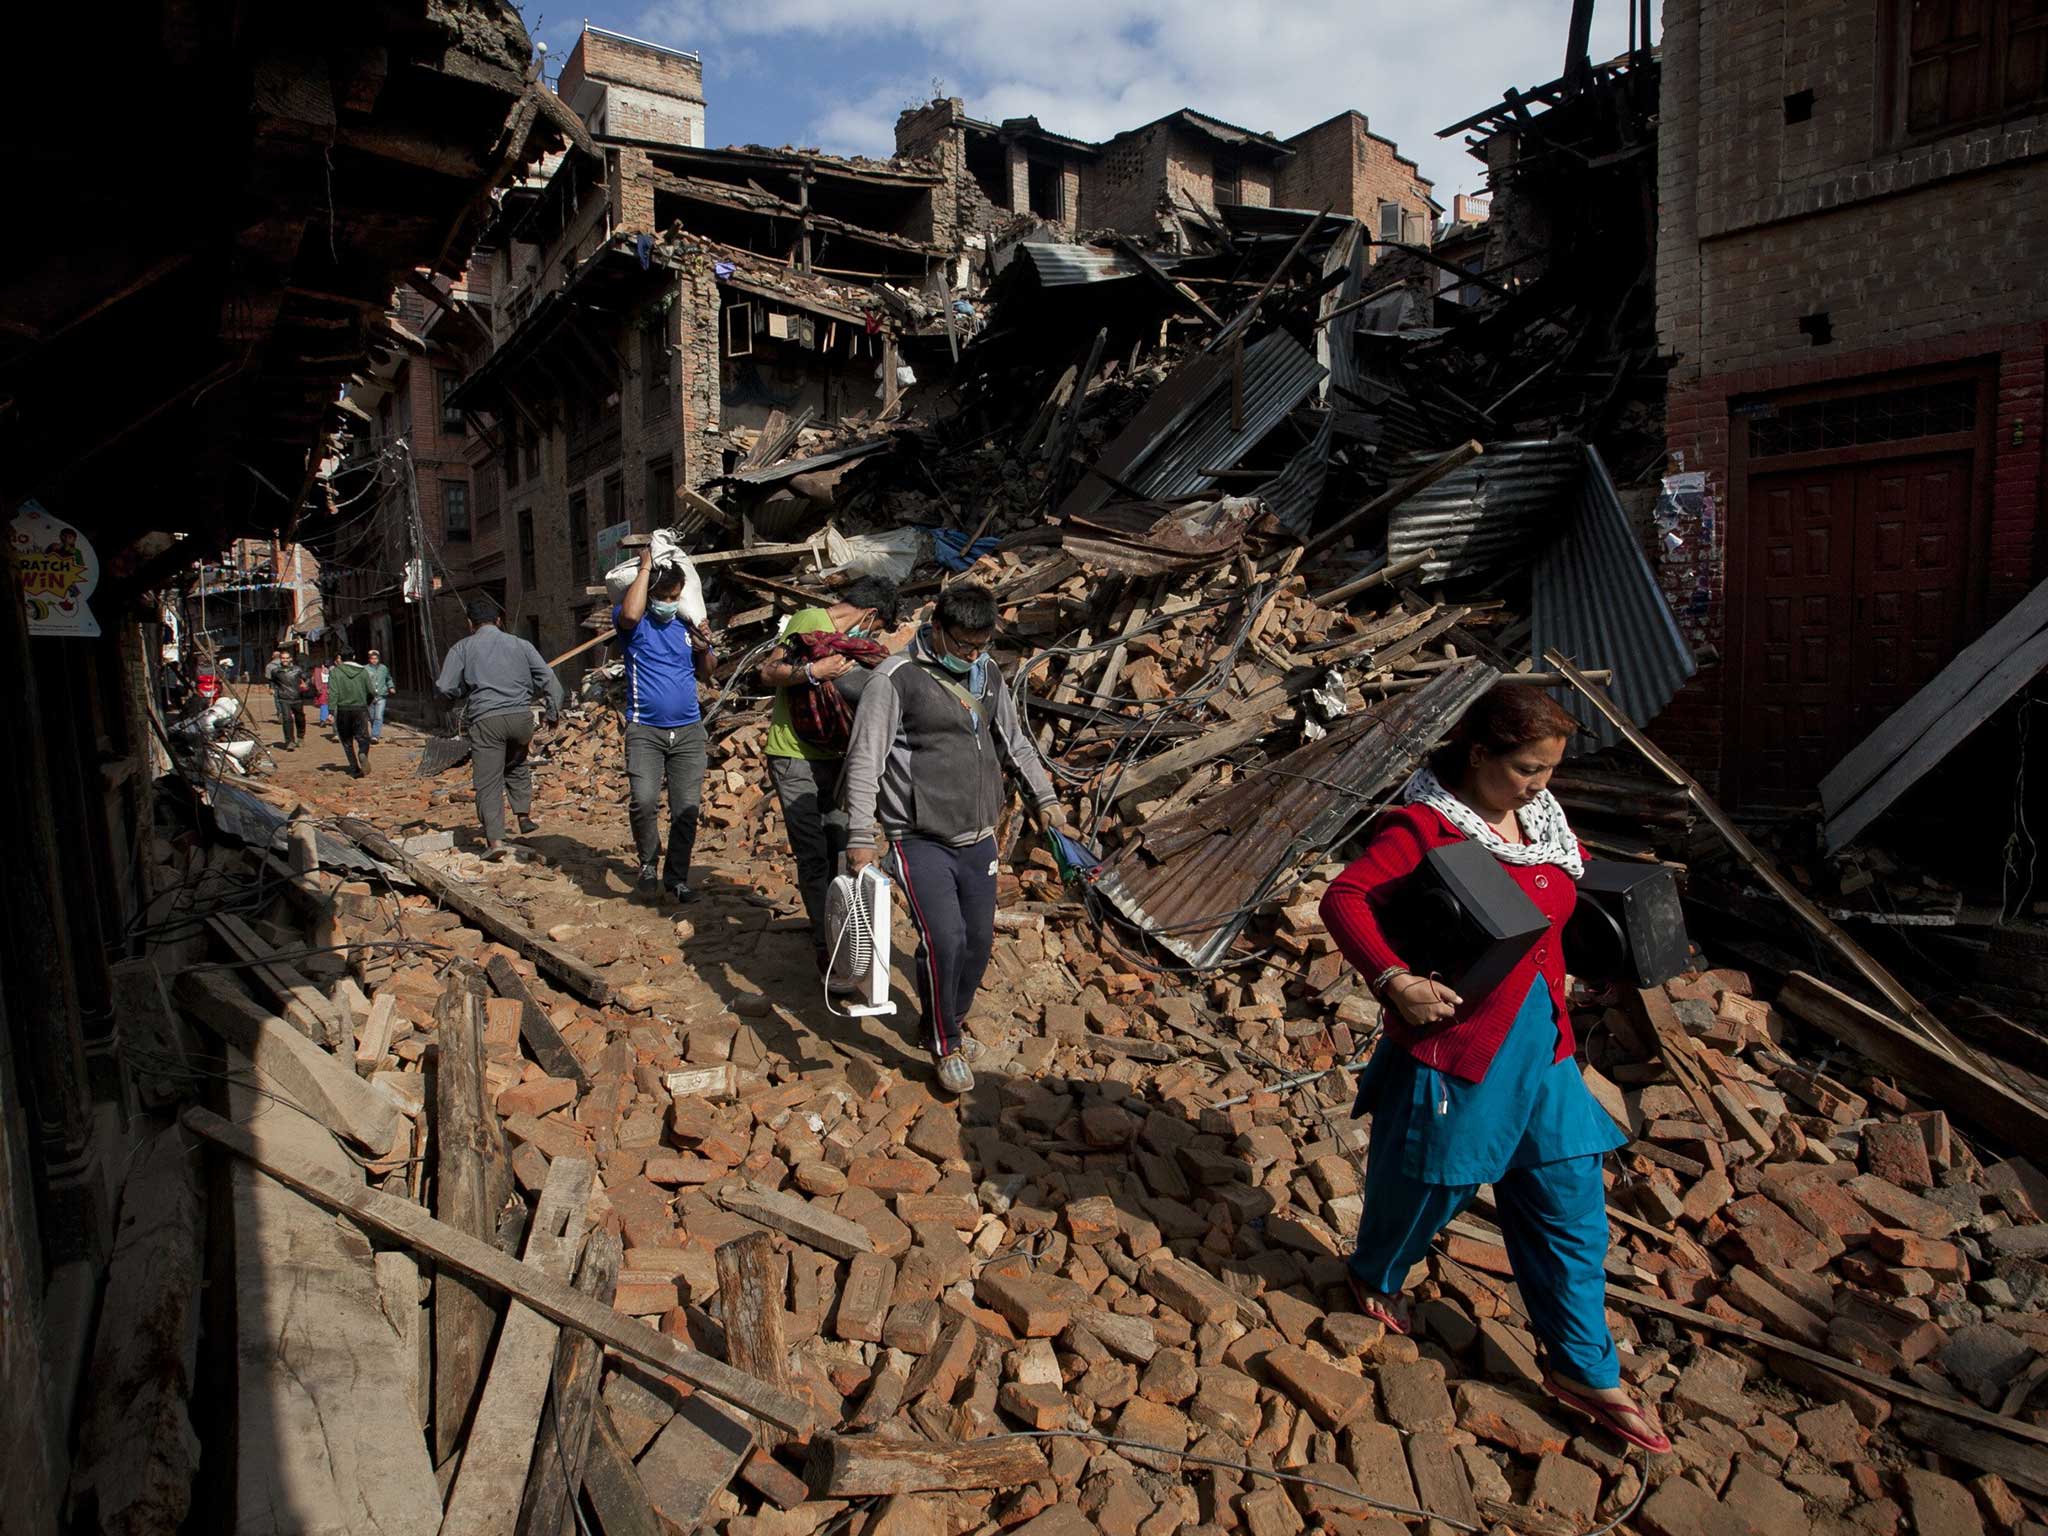 Residents of Kathmandu where much of the city remains without water or power